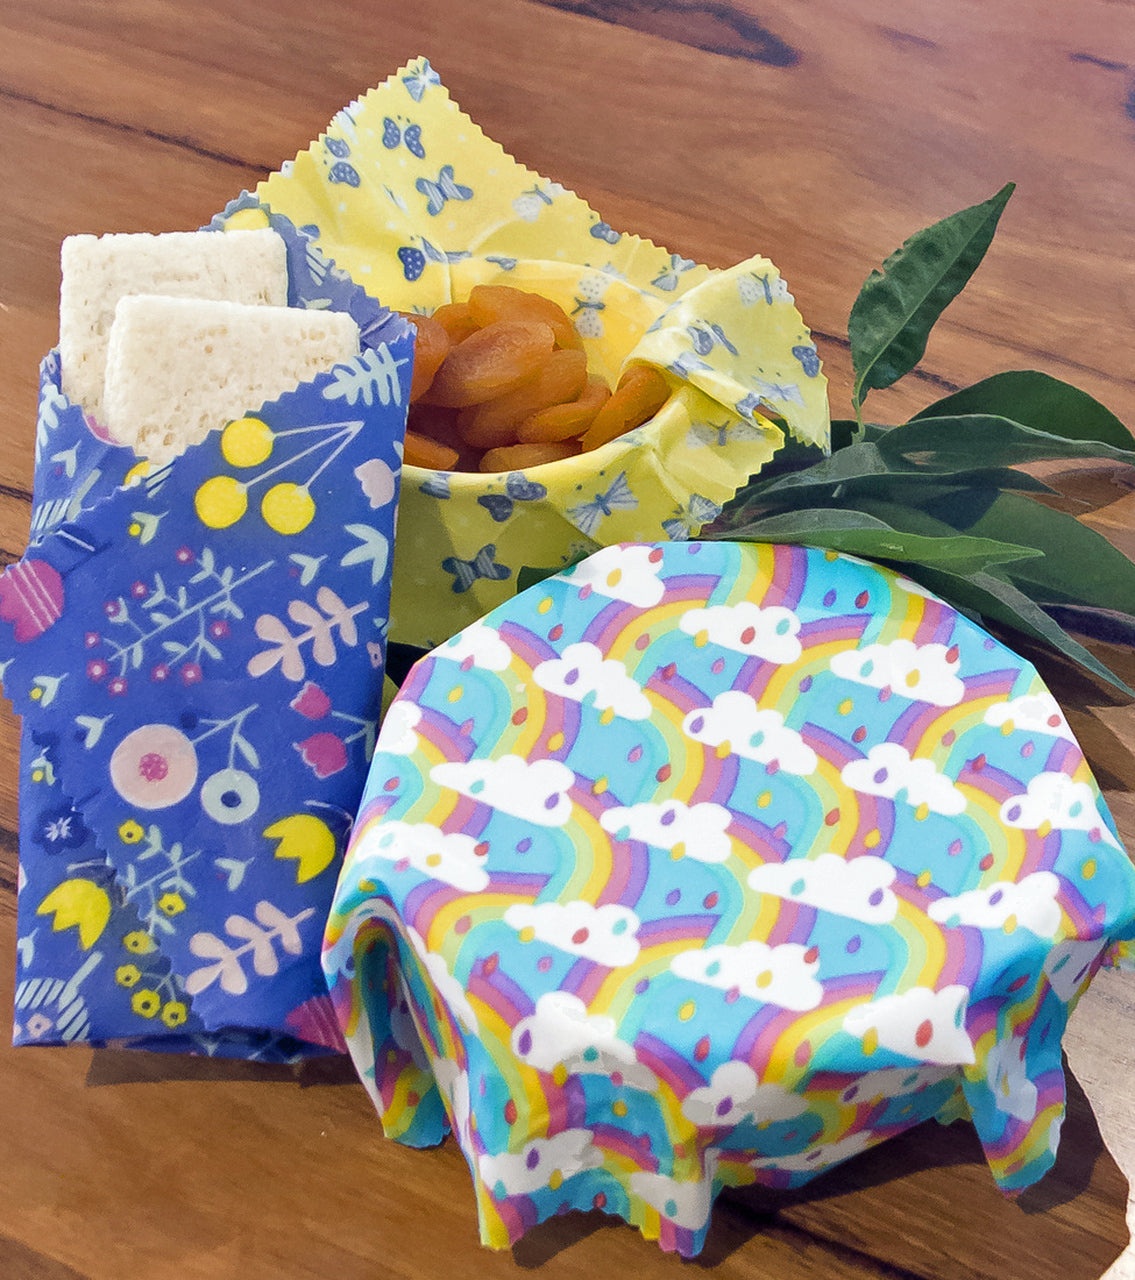 SALE Make Your Own Beeswax Wraps